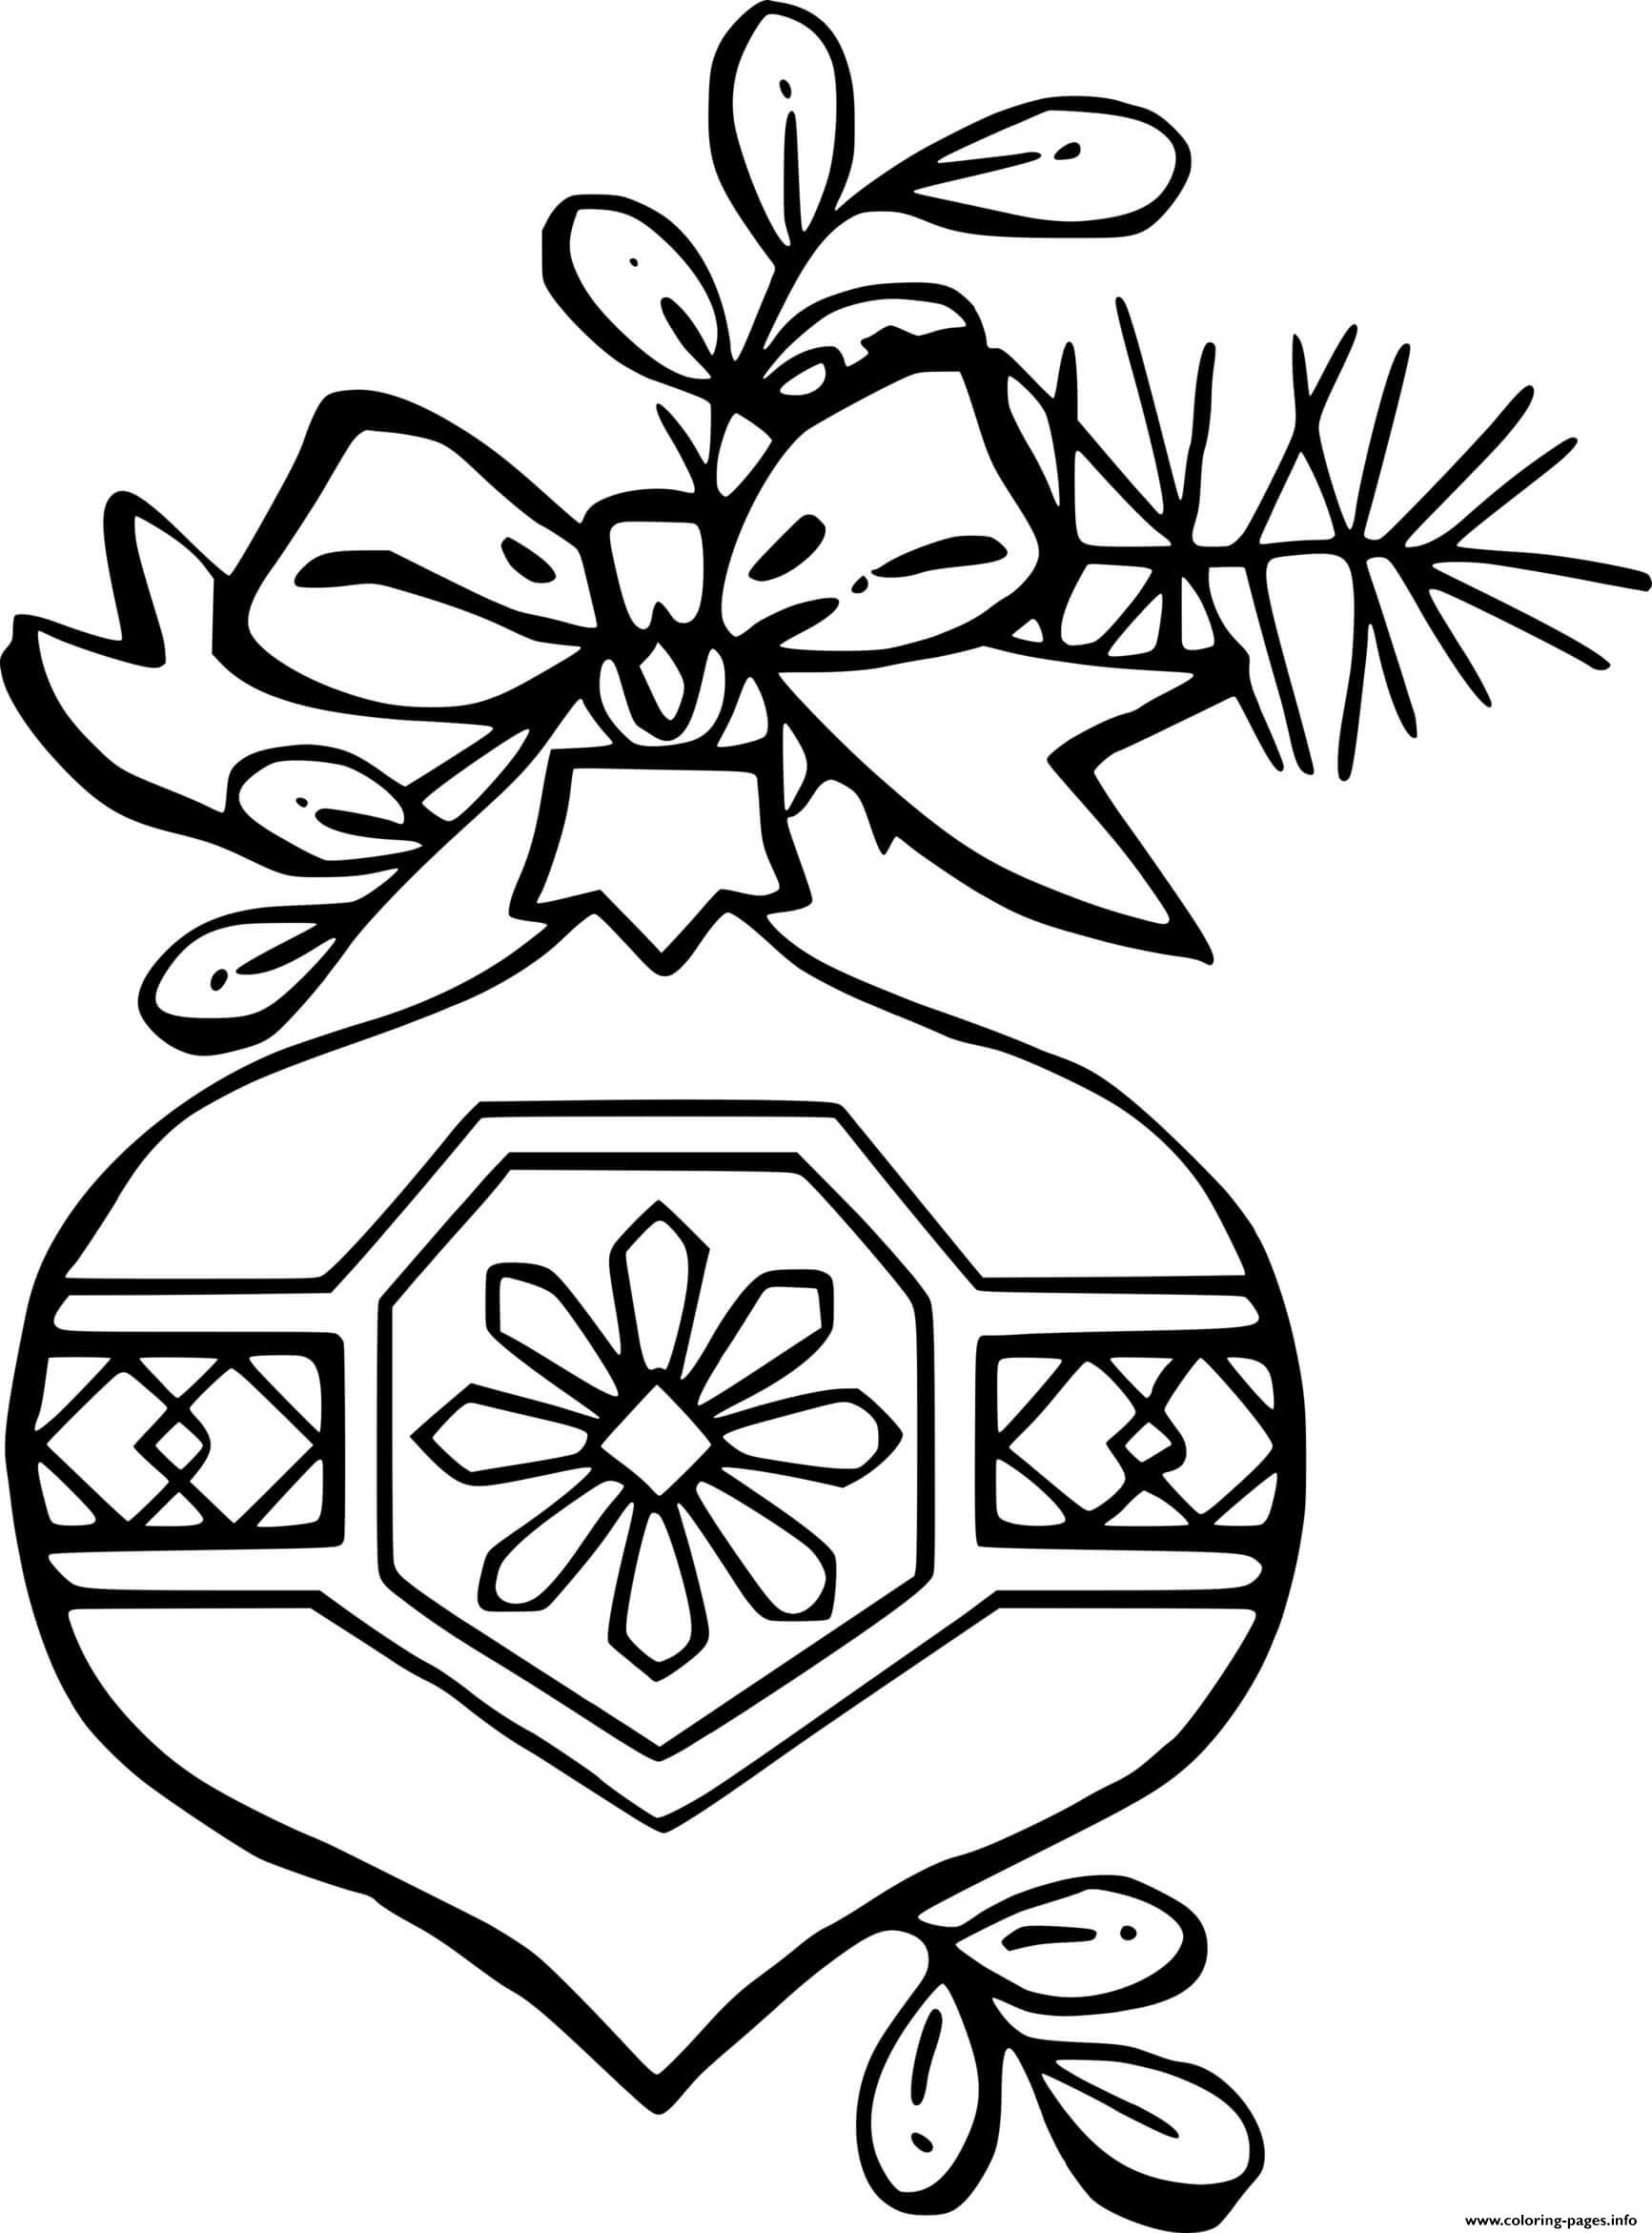 Bottle Shaped Ornament Coloring page Printable